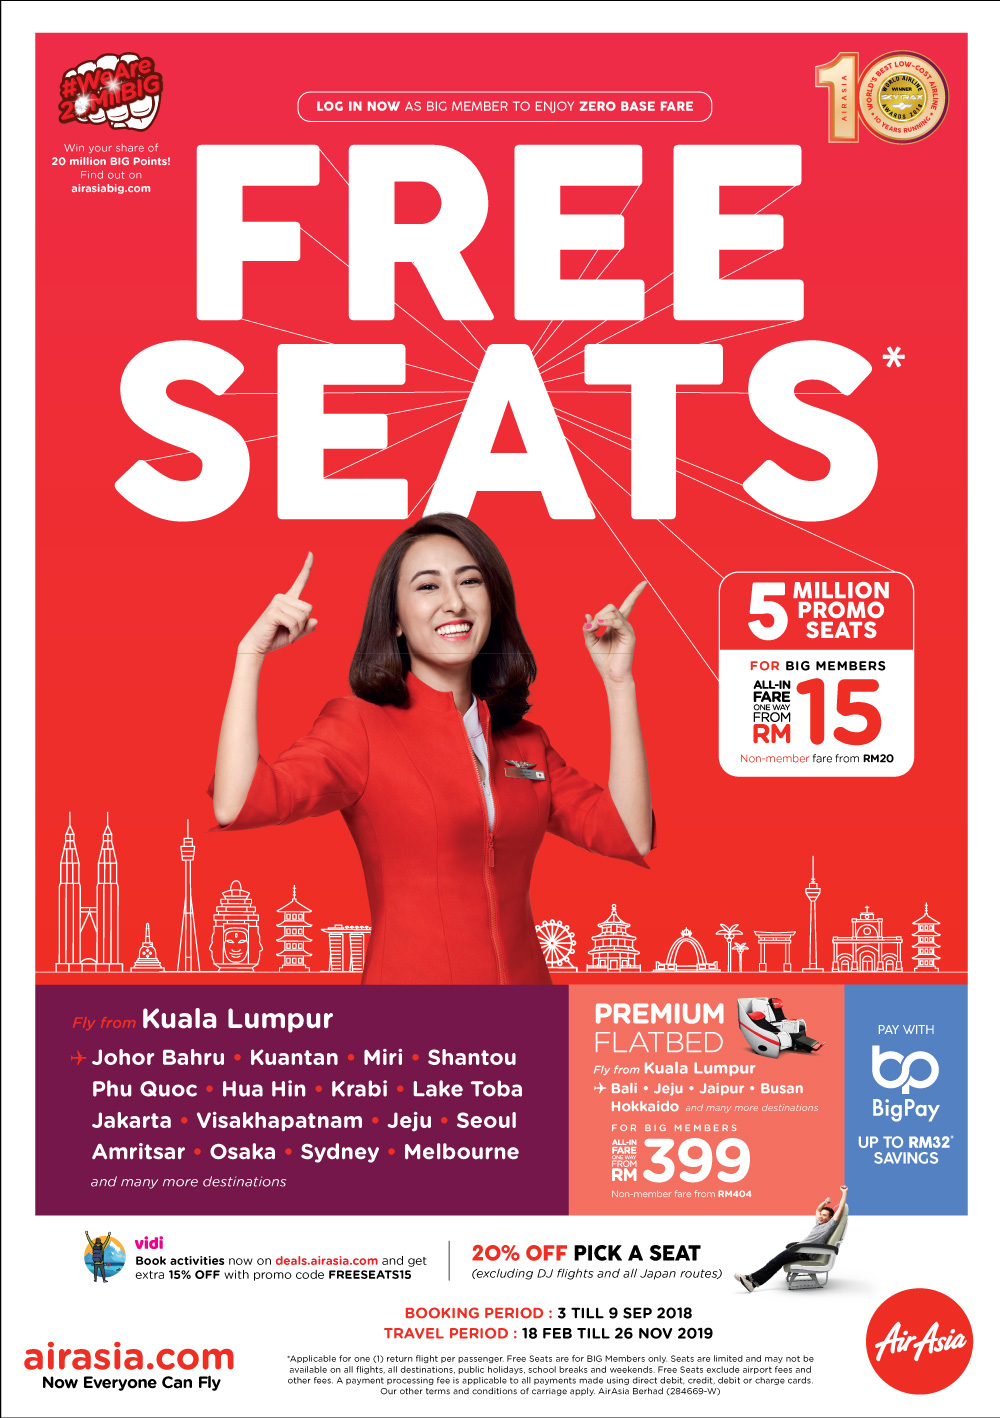 Airasia Free Seats 5 Million Promotional Seats Up For Grabs Airasia Newsroom